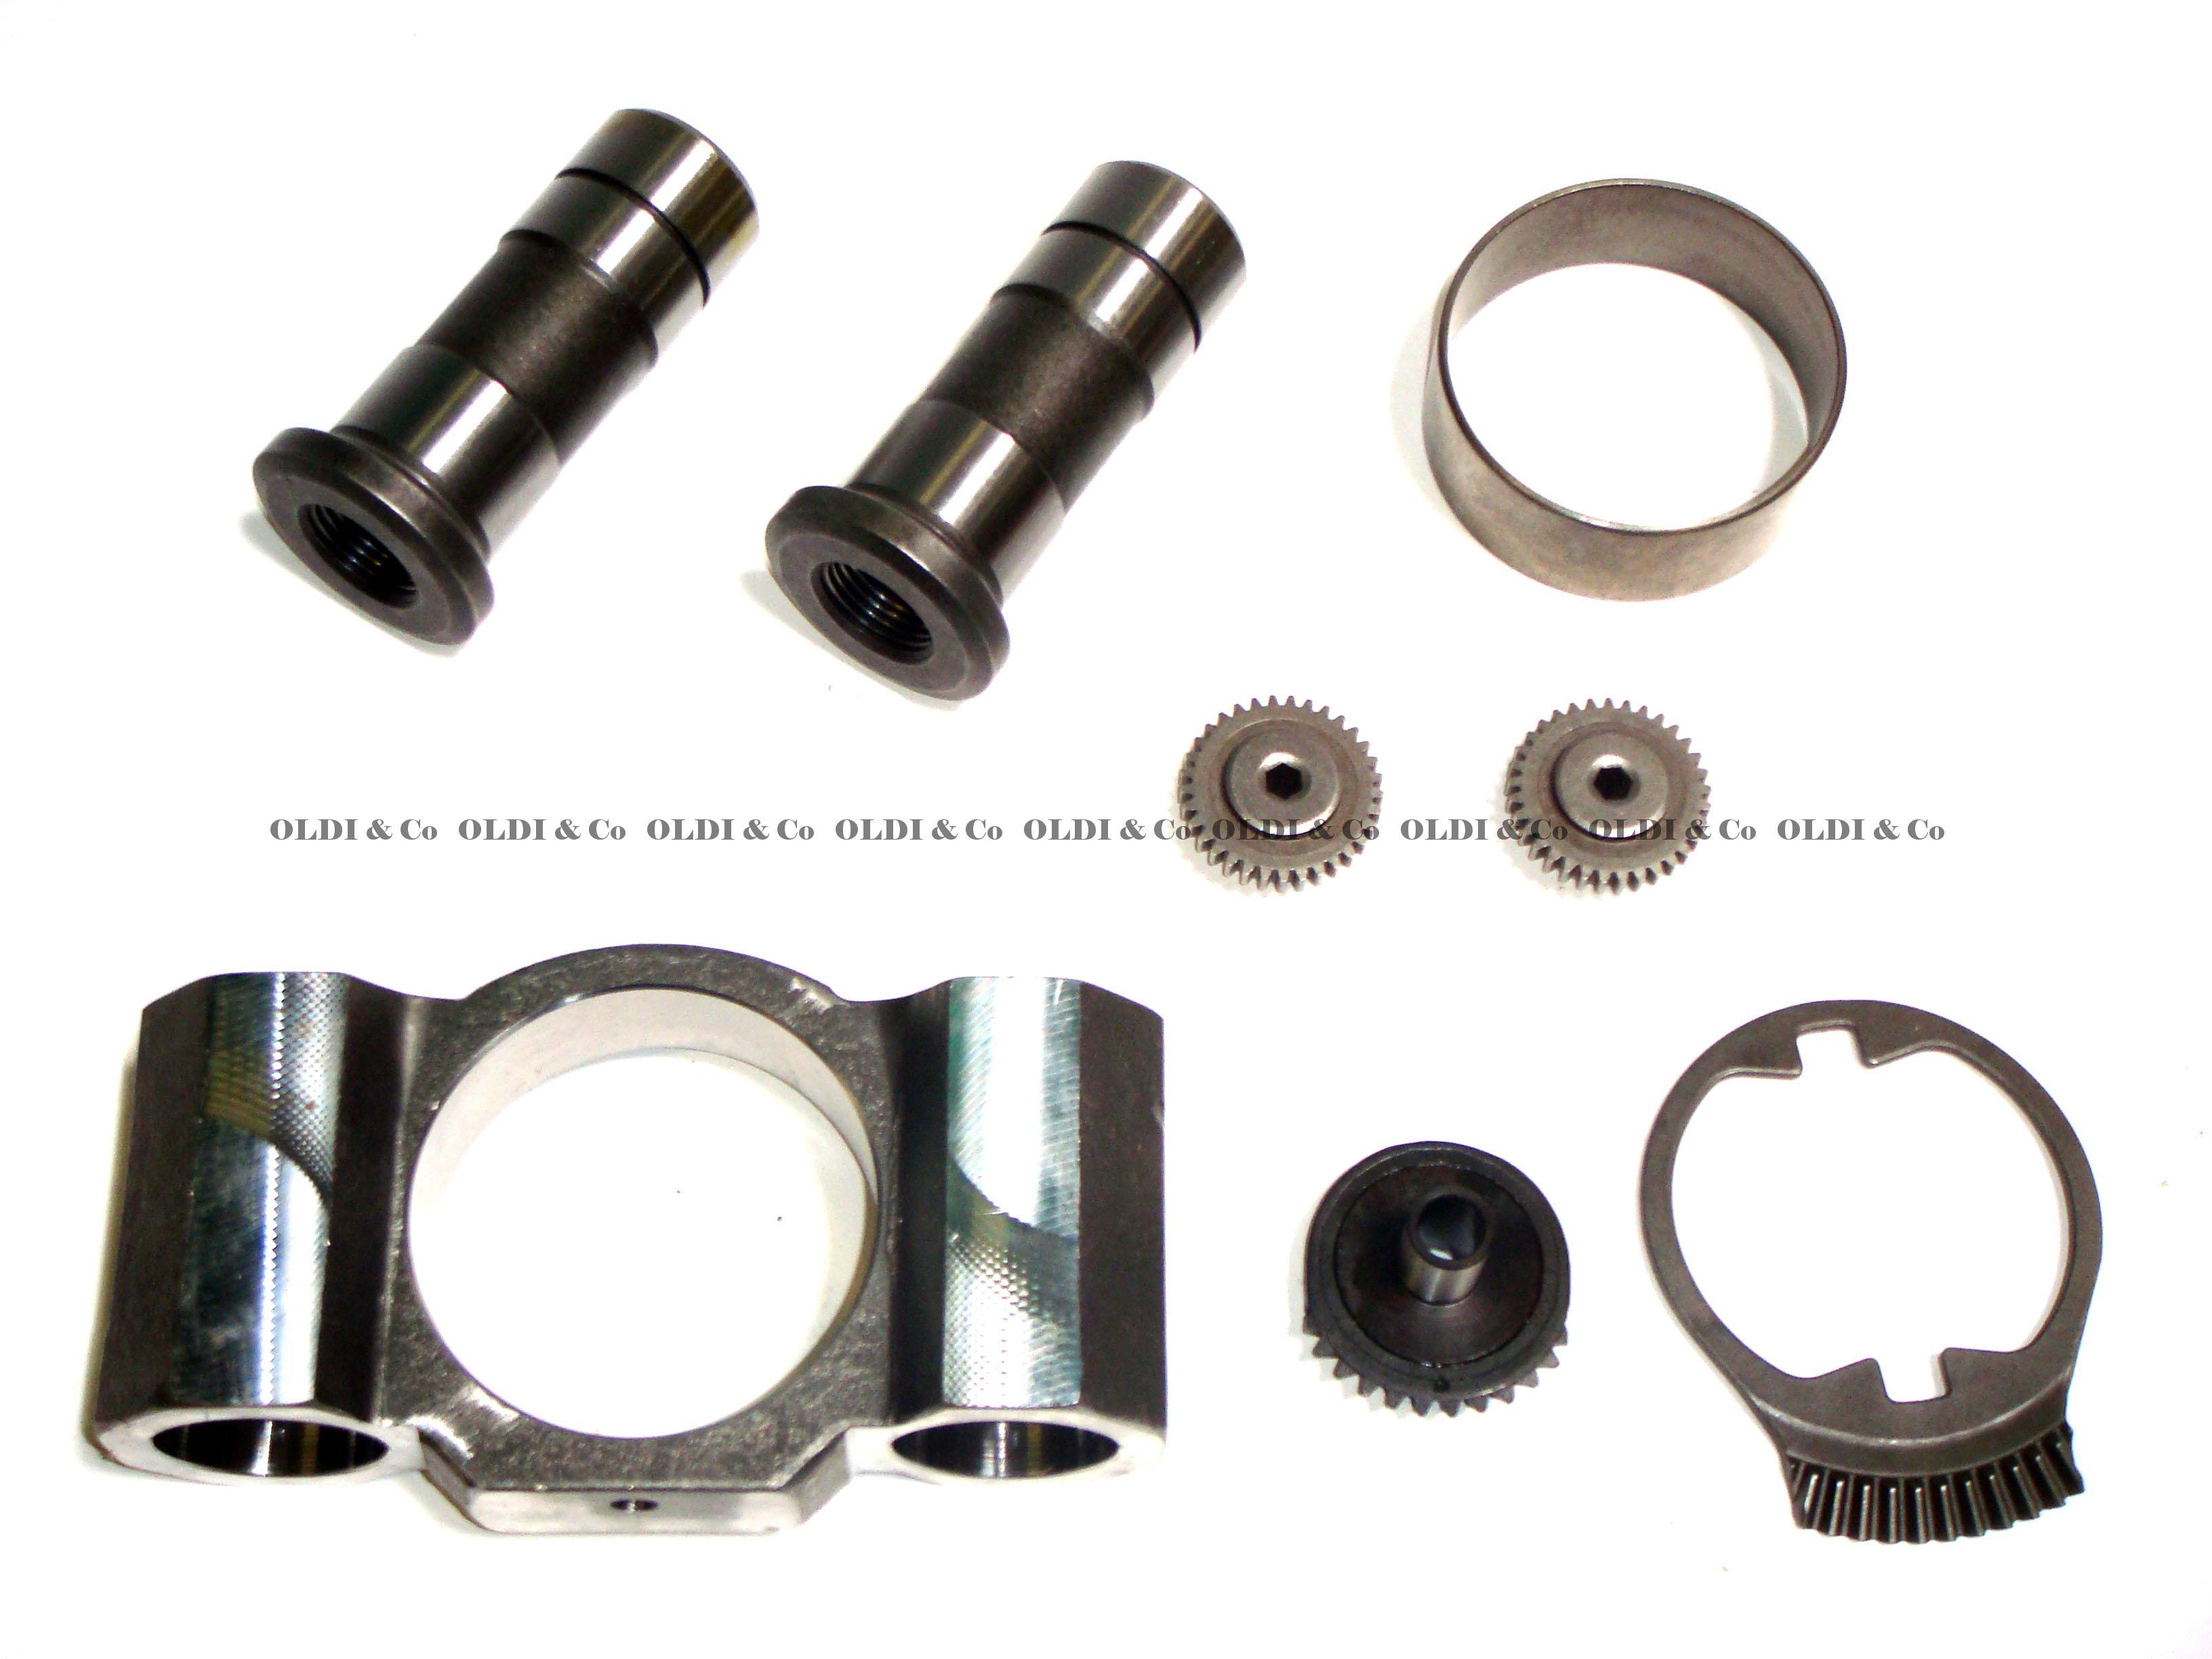 10.033.14925 Calipers and their components → Adjustment mechanism repair kit